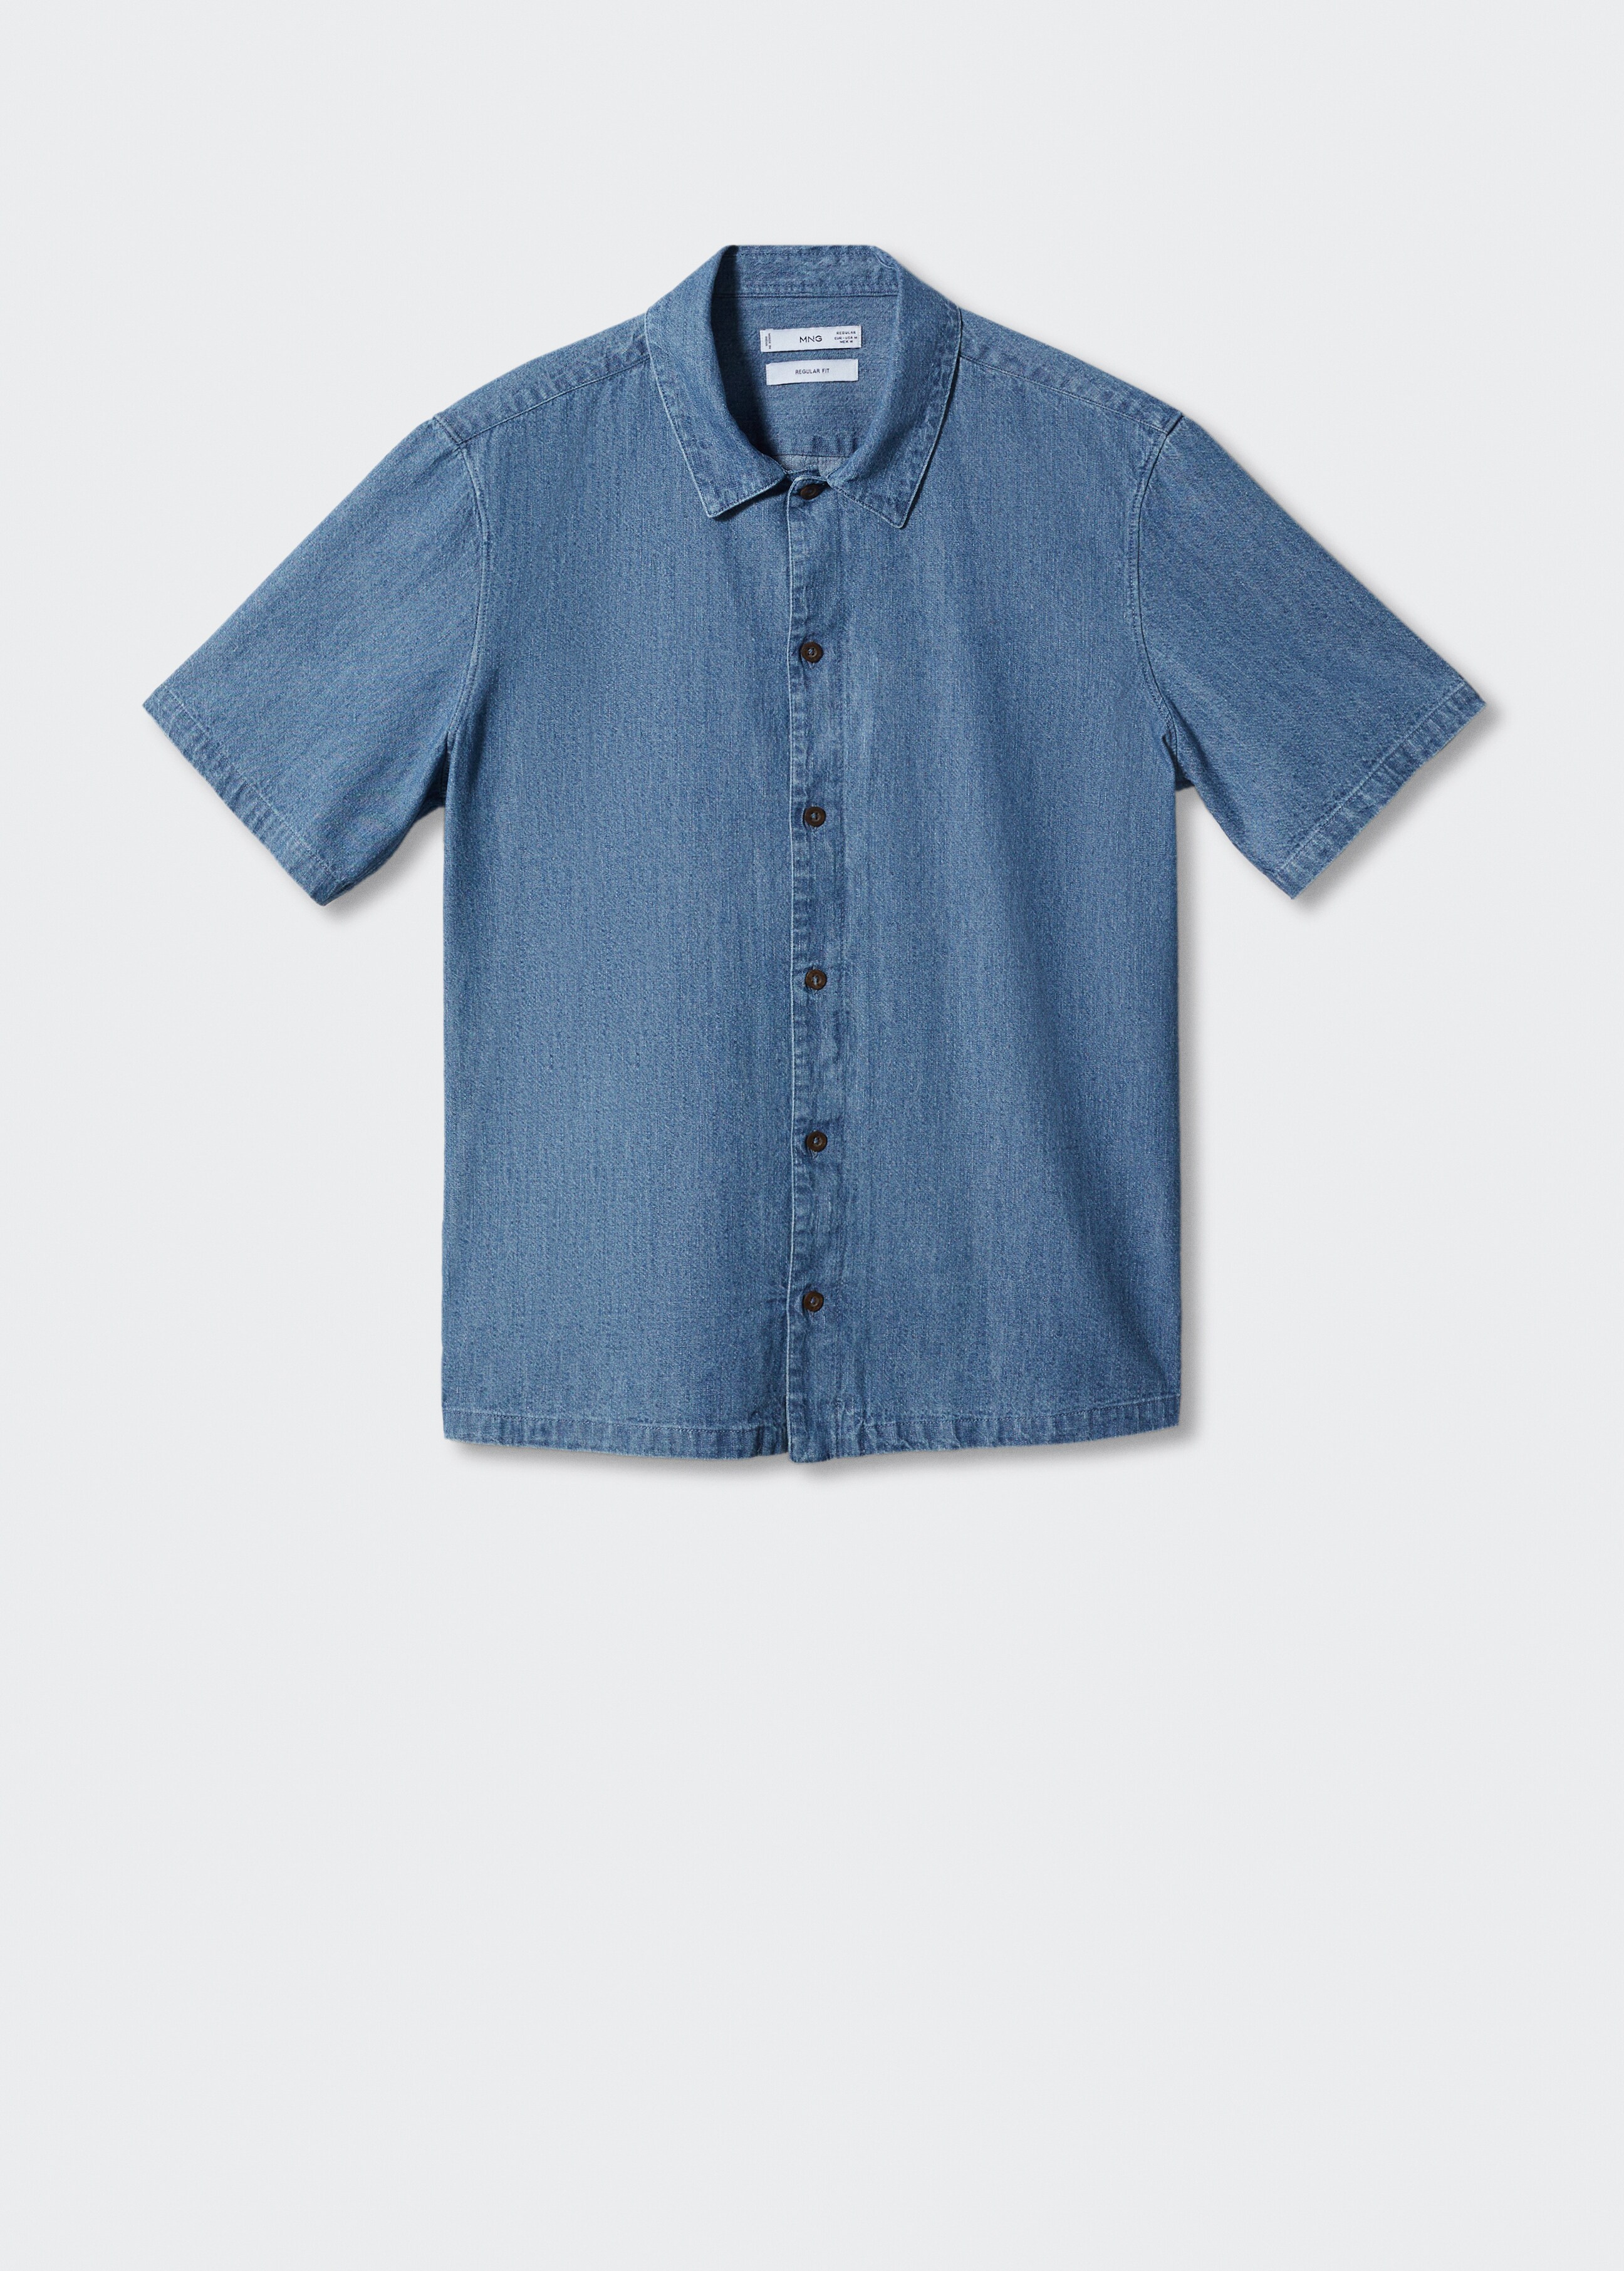 100% cotton chambray shirt - Article without model